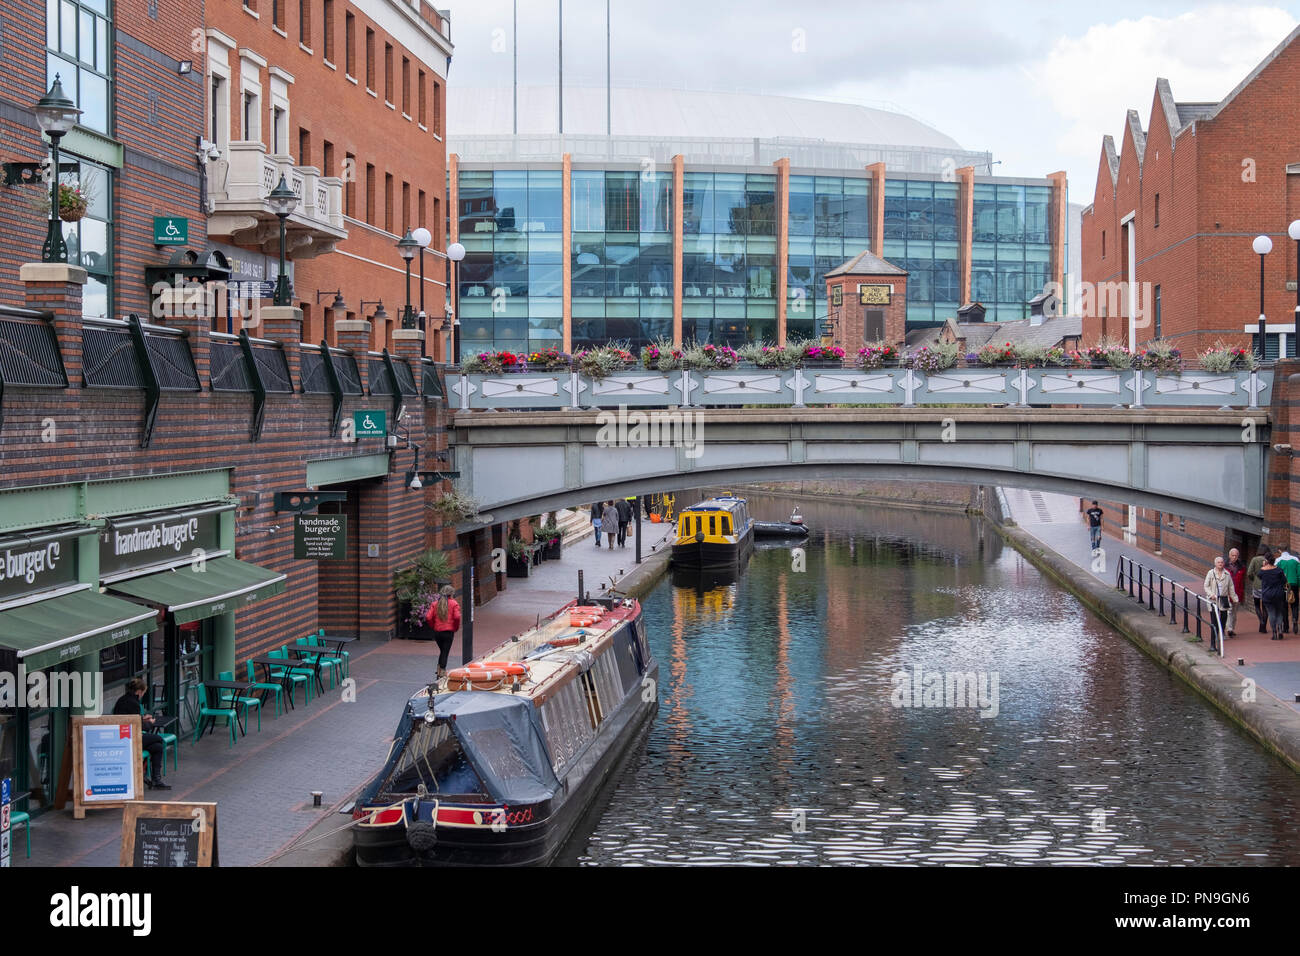 Arena Birmingham venue and the Canals at Brindleyplace, Birmingham, England Stock Photo